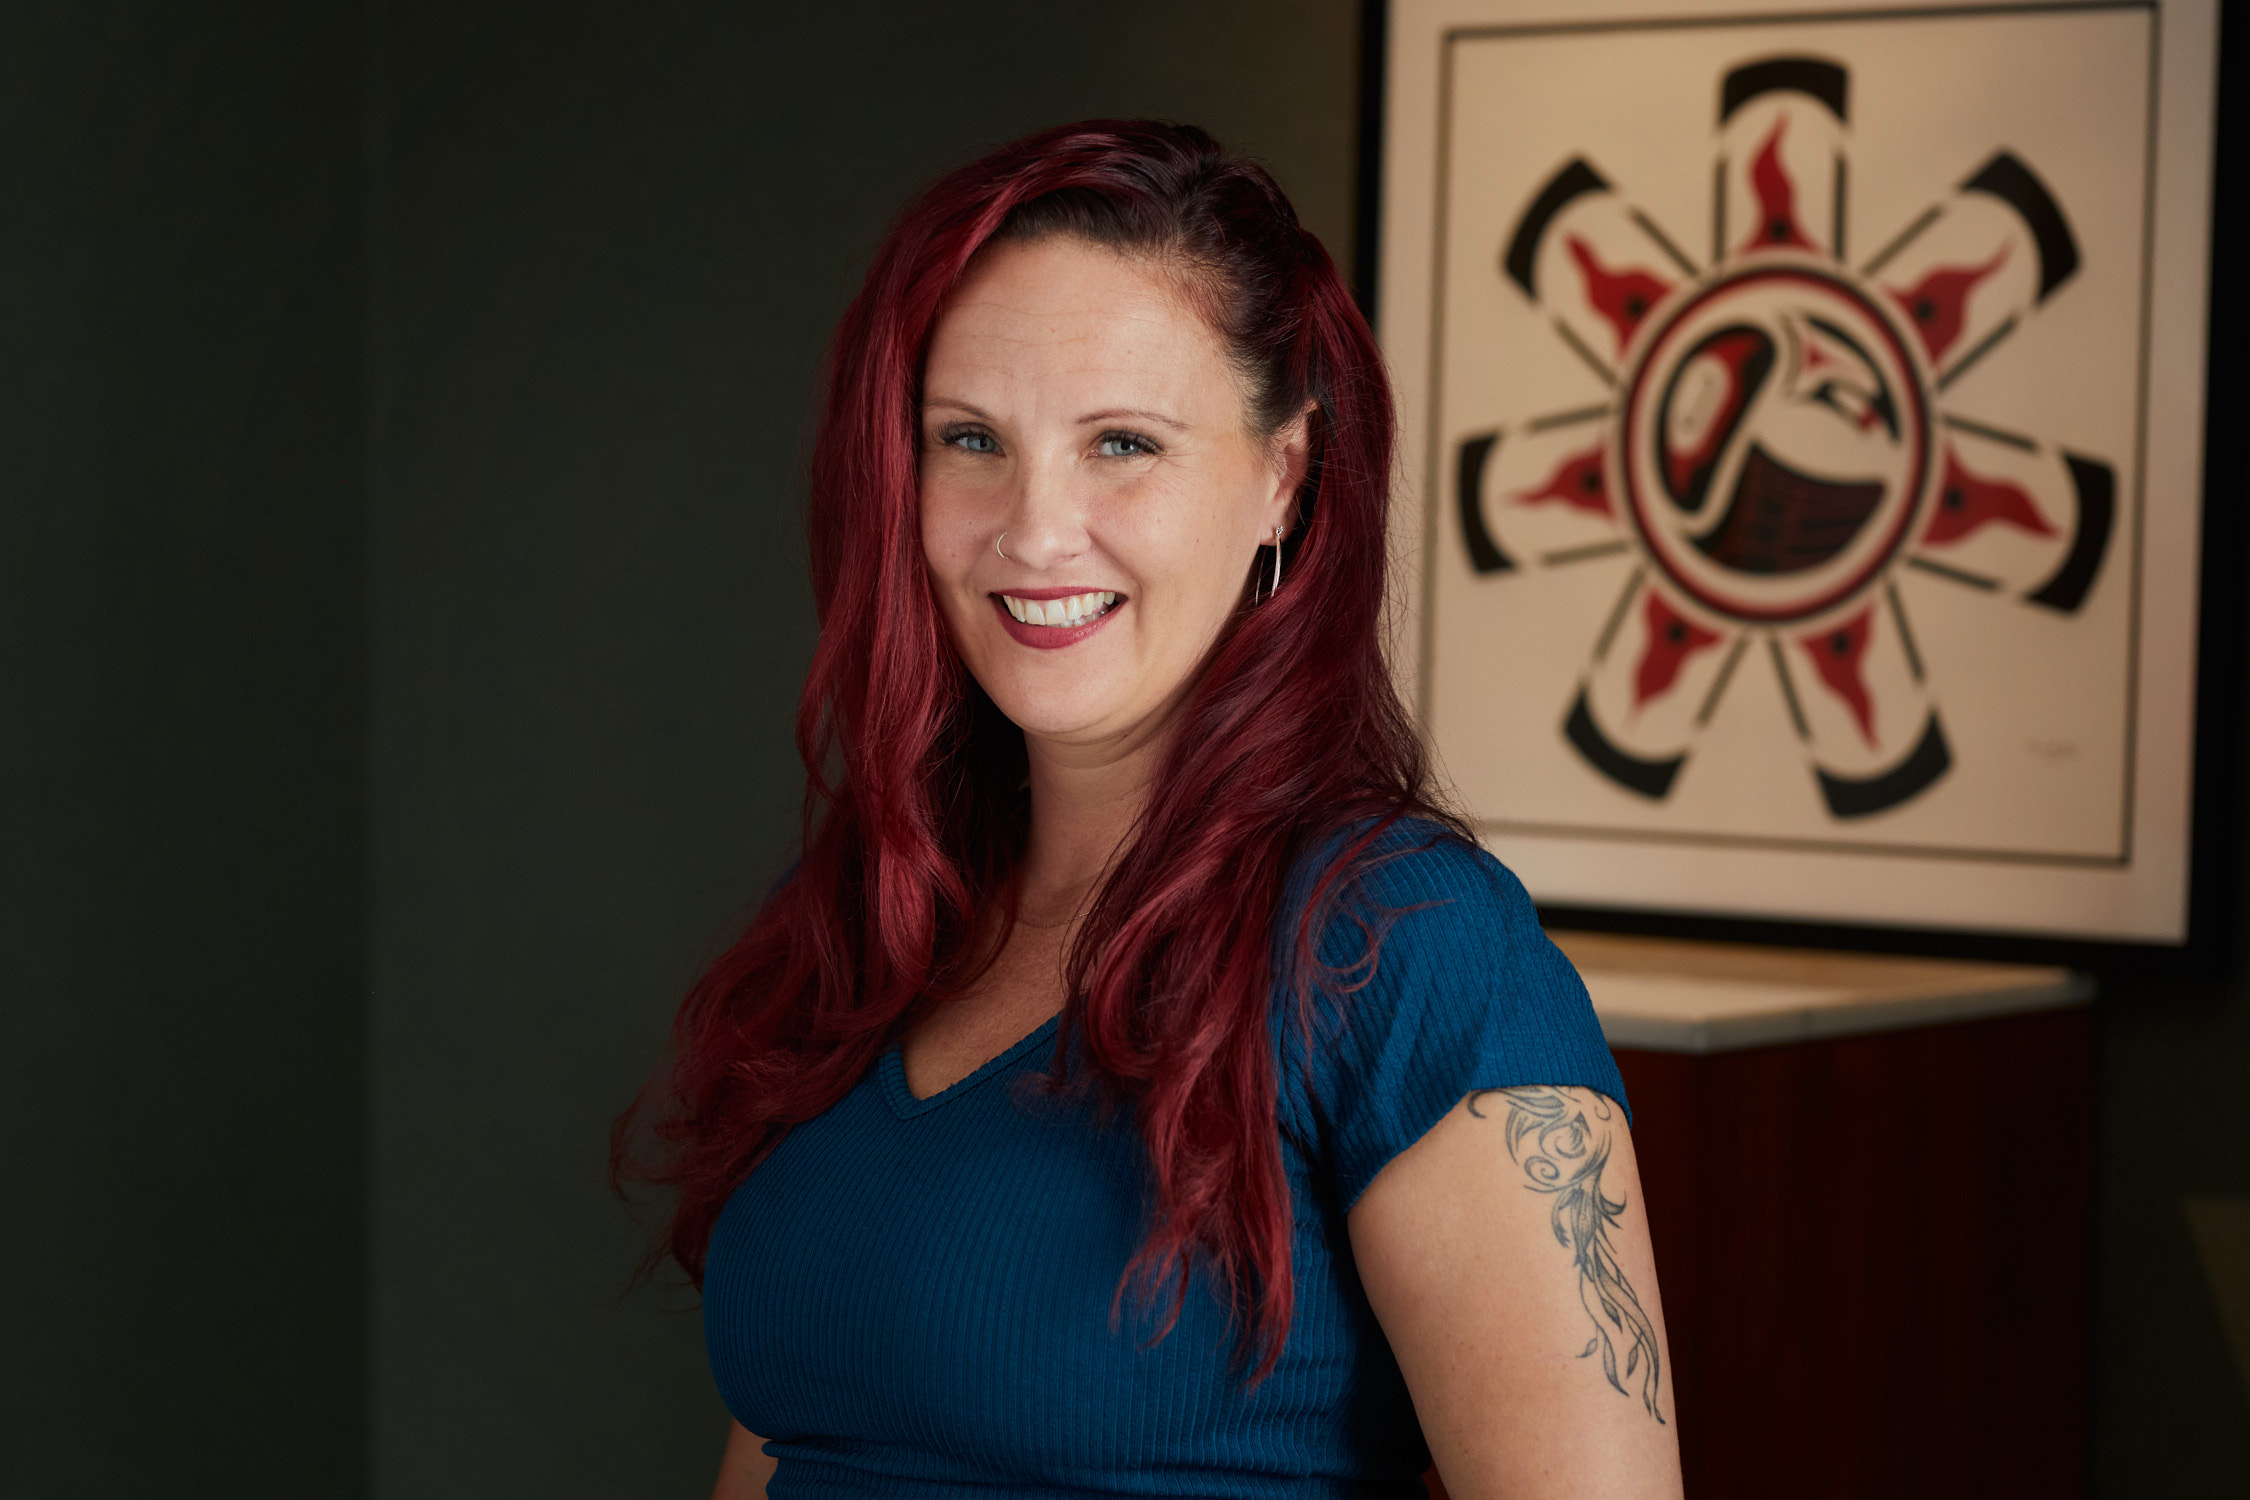 Photo of Naomi Graham, in the background a photo of an Eagle in red, black and white, in the Haida Nation type of iconography, with 7 feathers around a circle.